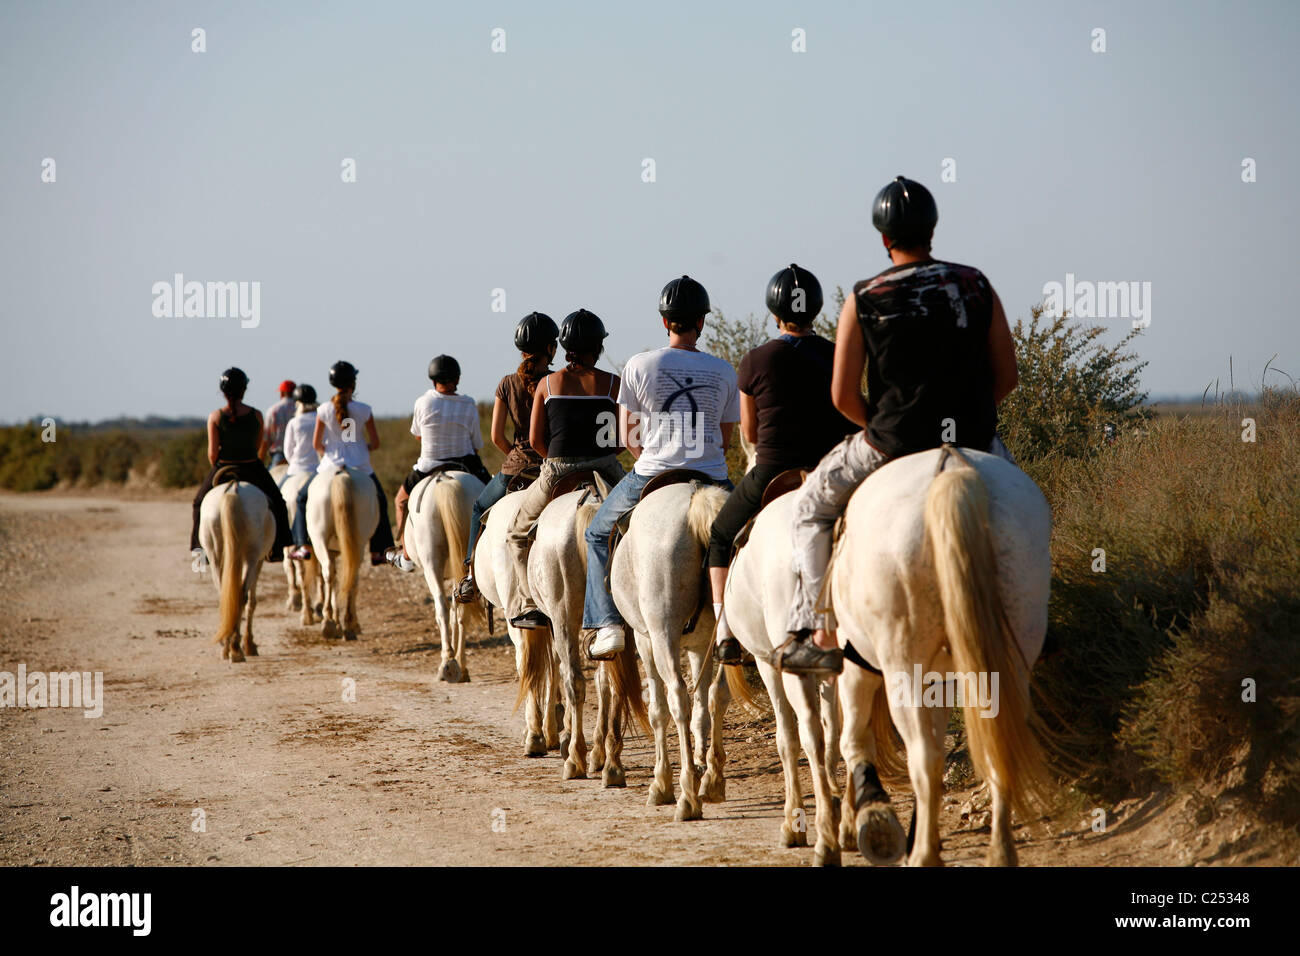 People riding horses near the area of the Etang du Vaccares reserve, Camargue, Provence, France. Stock Photo